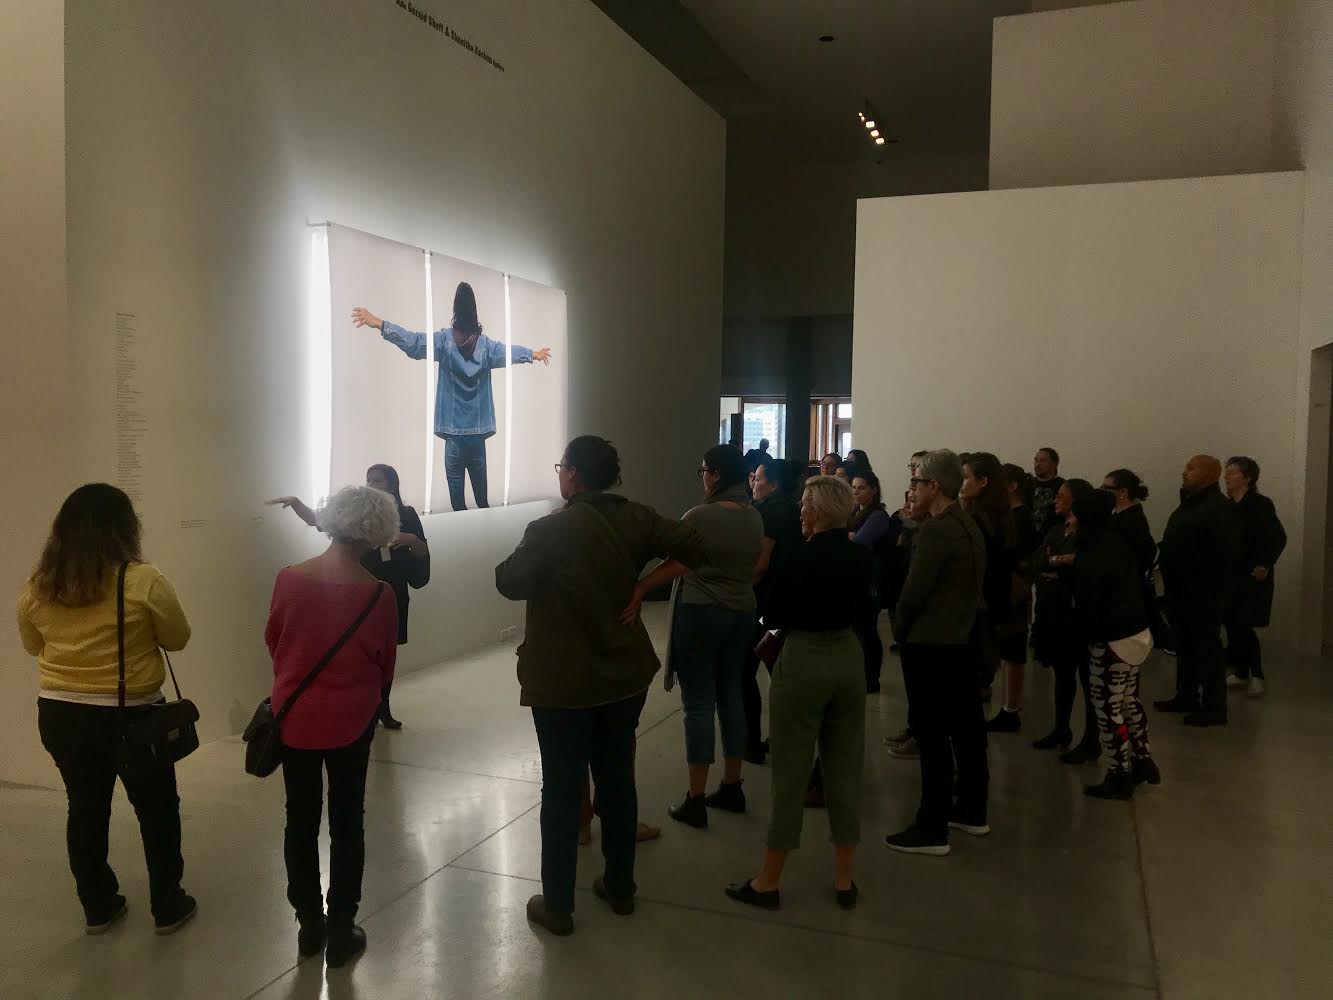  Tour of  Rebecca Belmore: Facing The Monumental  at the AGO with curator Wanda Nanibush, October 2018. Photo by Jessica Winters. 